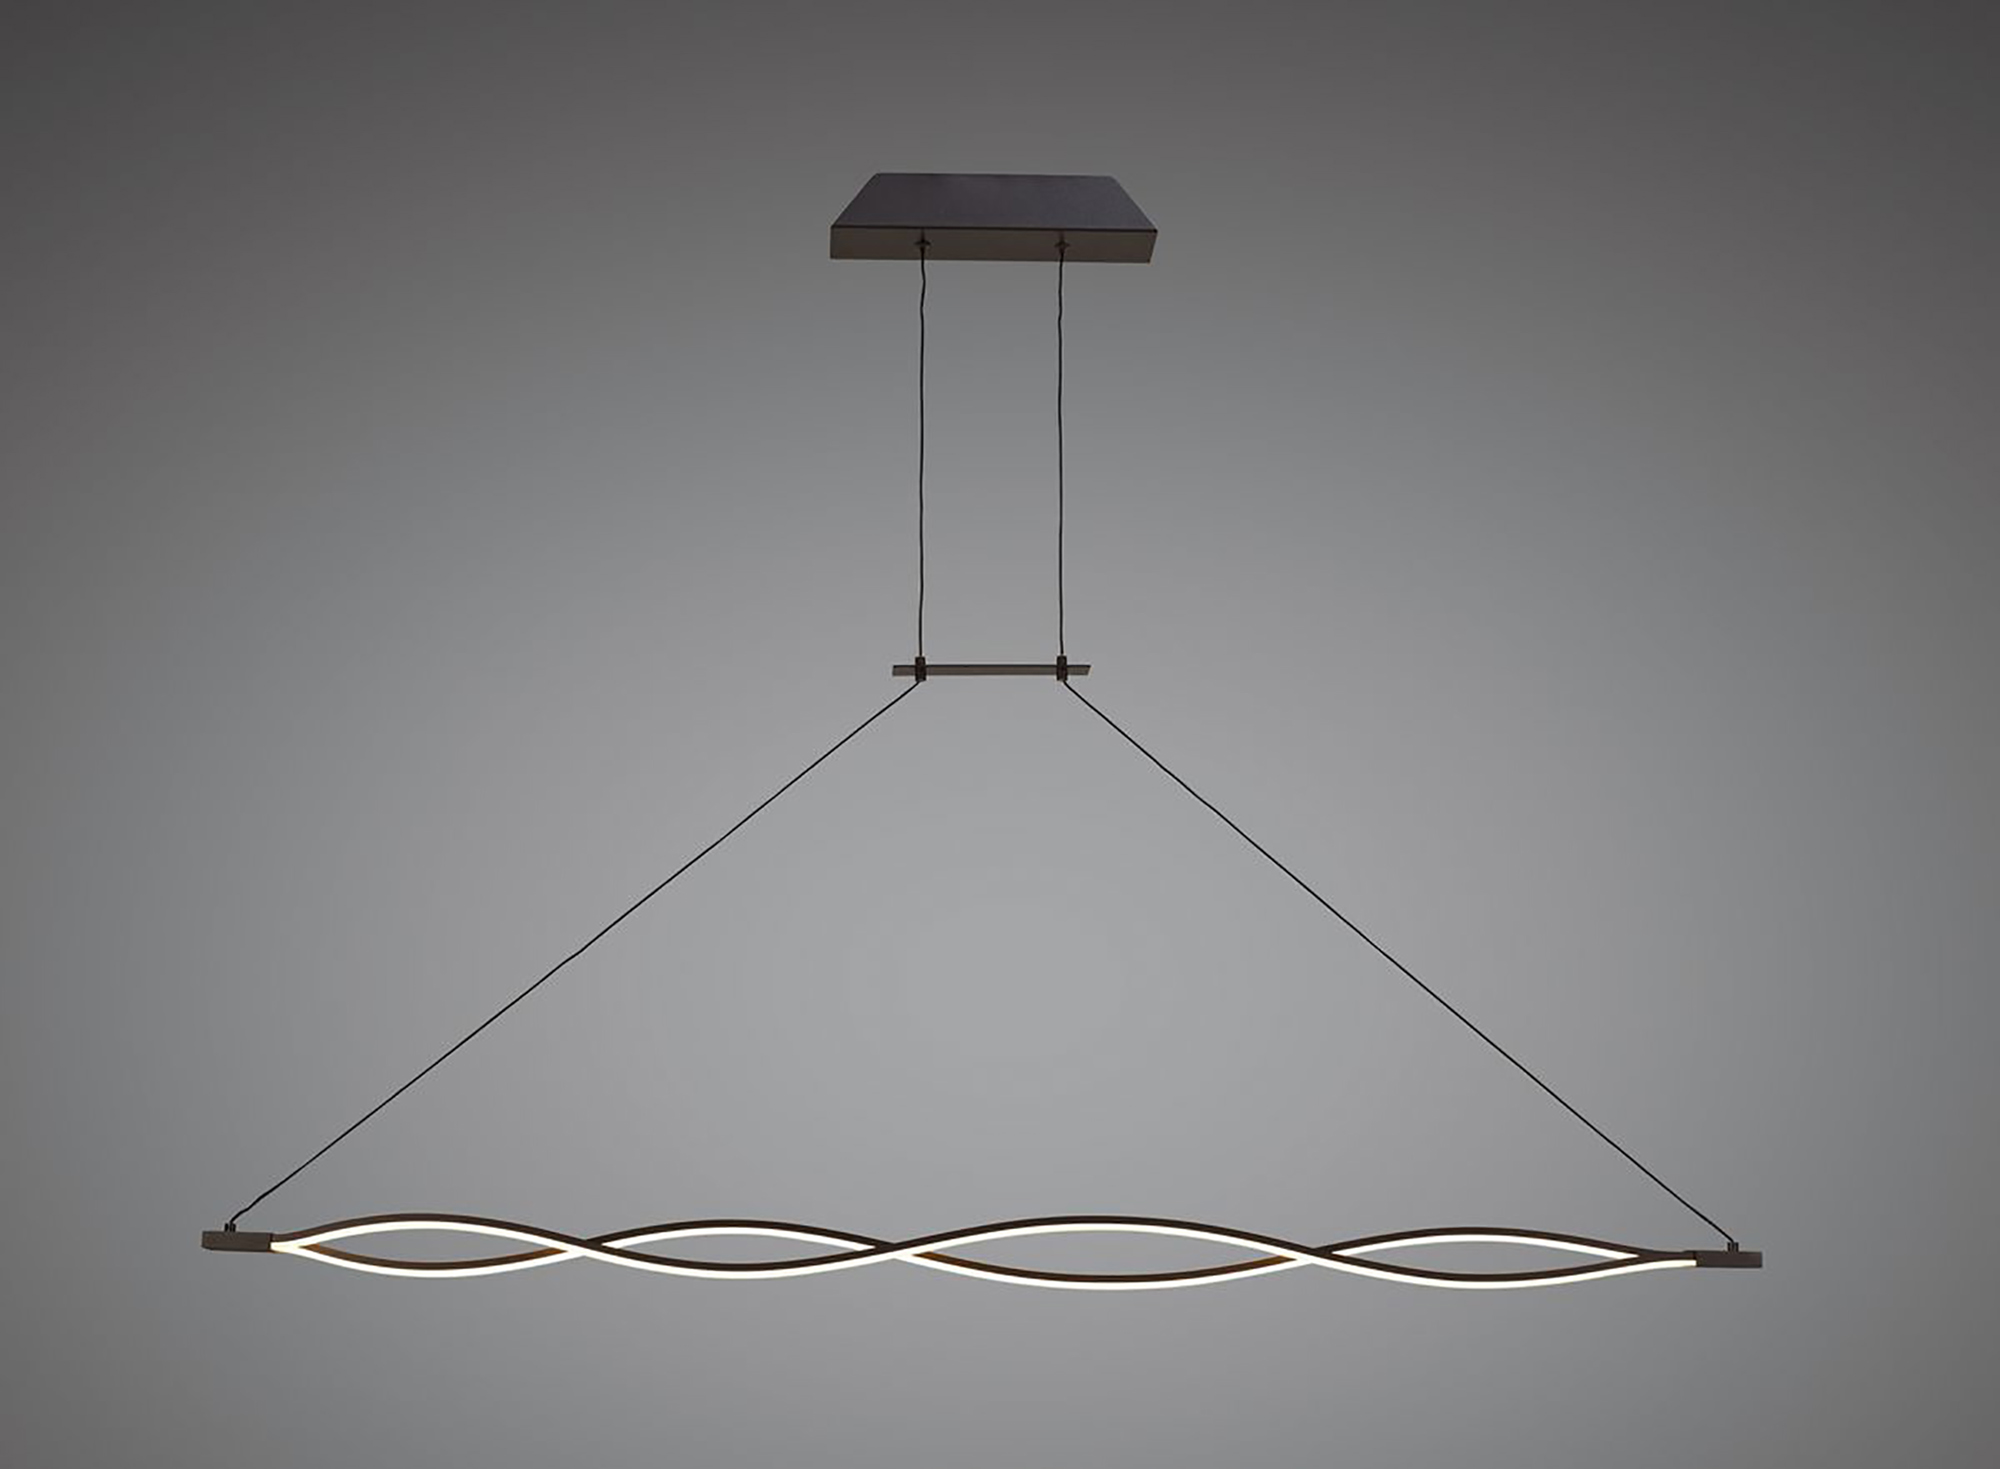 Sahara Brown Oxide XL Ceiling Lights Mantra Linear Fittings